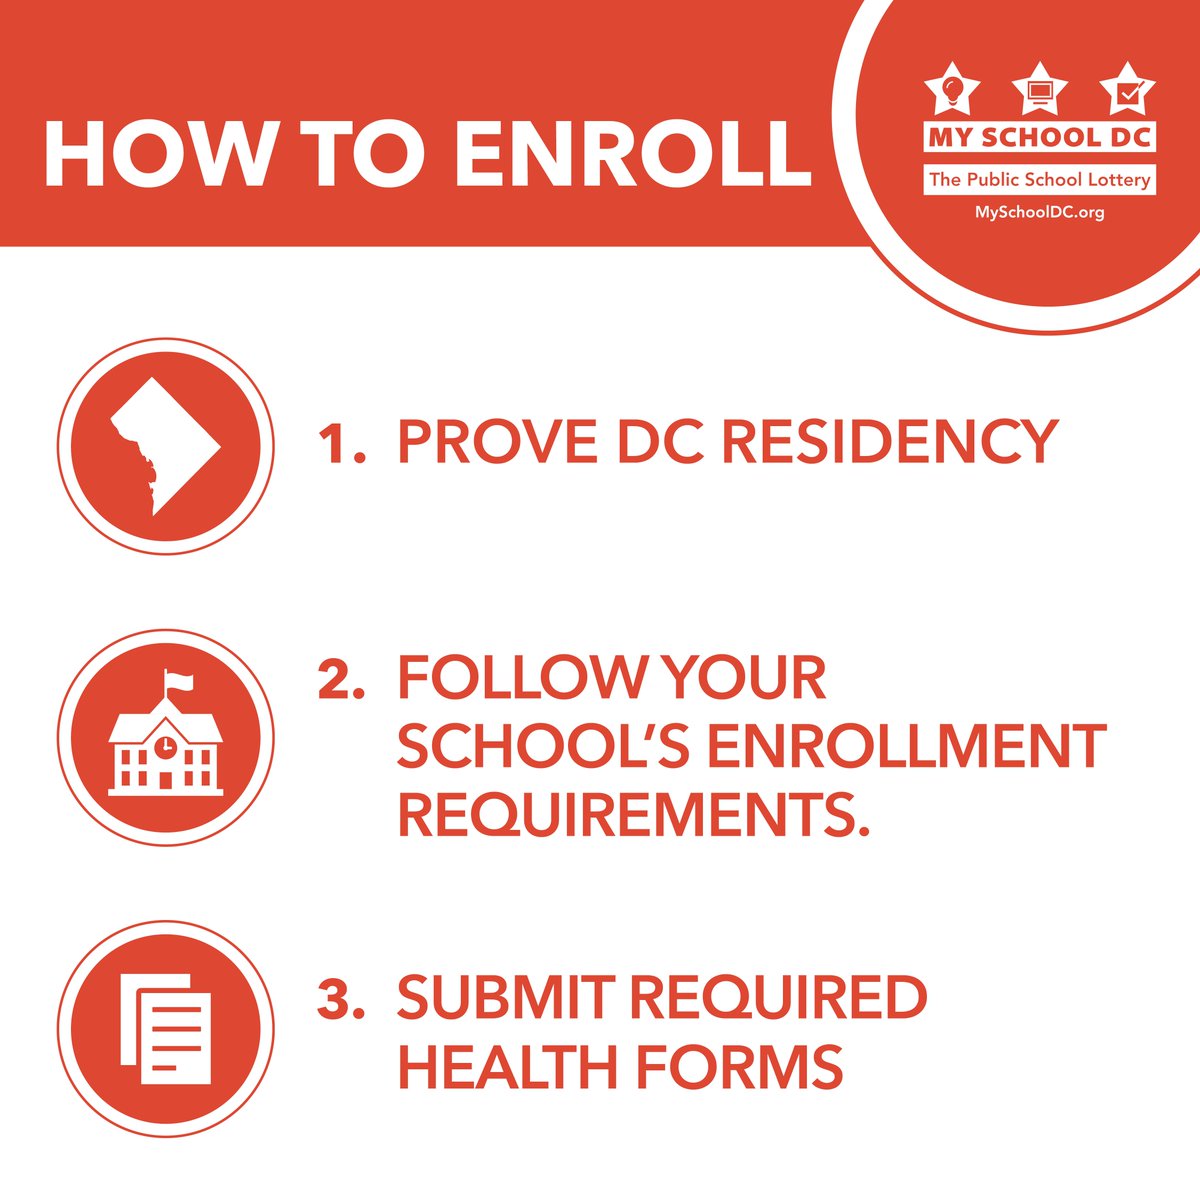 To accept your lottery match, you must enroll at the school by May 1. There are three steps to complete your enrollment: Prove DC residency, follow your school’s enrollment requirements, and submit required health forms. Learn more here: buff.ly/41K2g2y